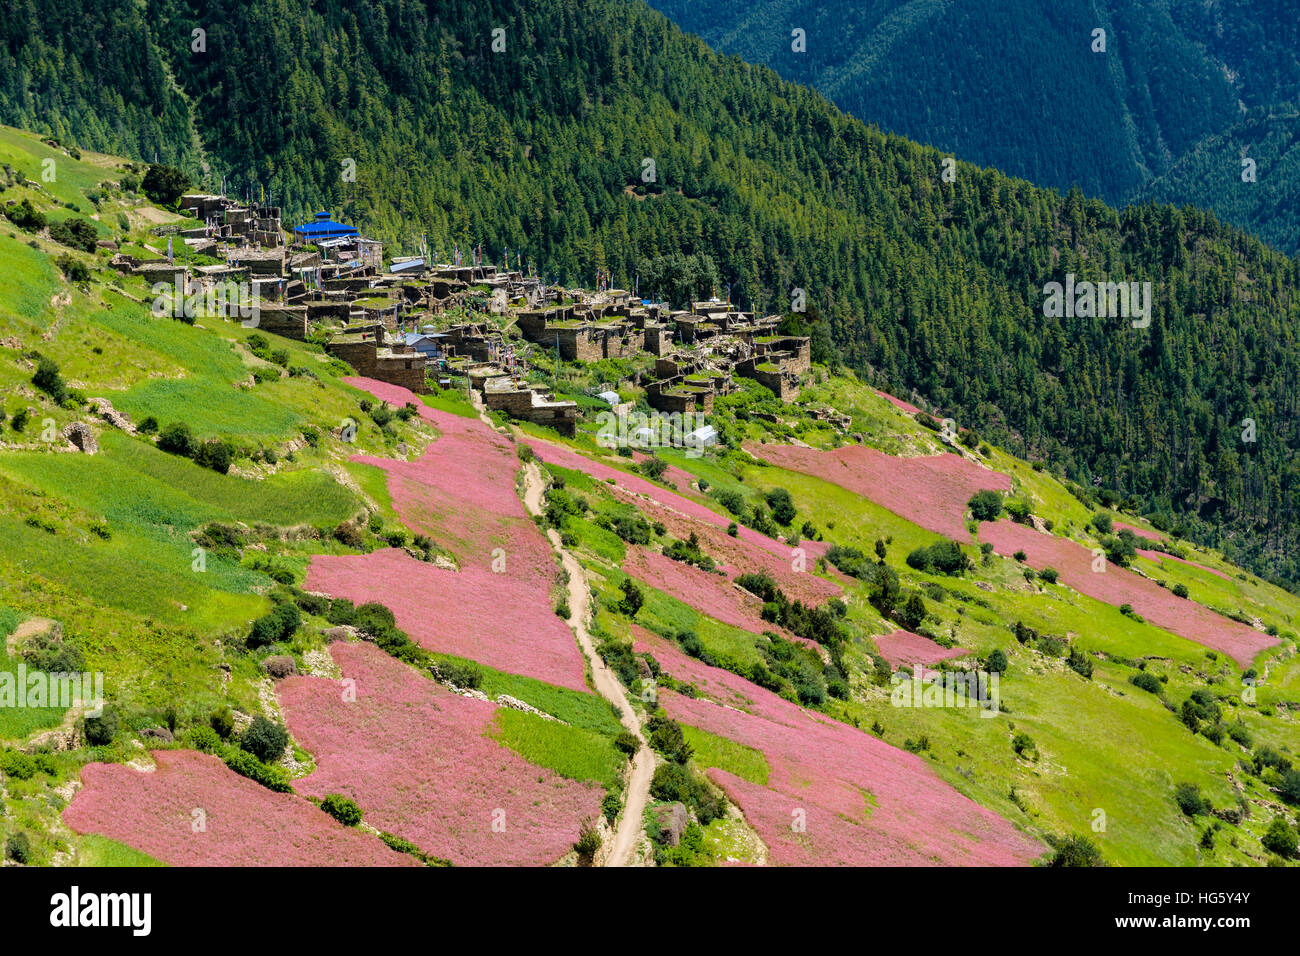 Agricultural landscape with pink buckwheat fields in blossom, Upper Marsyangdi valley, Ghyaru, Manang District, Nepal Stock Photo